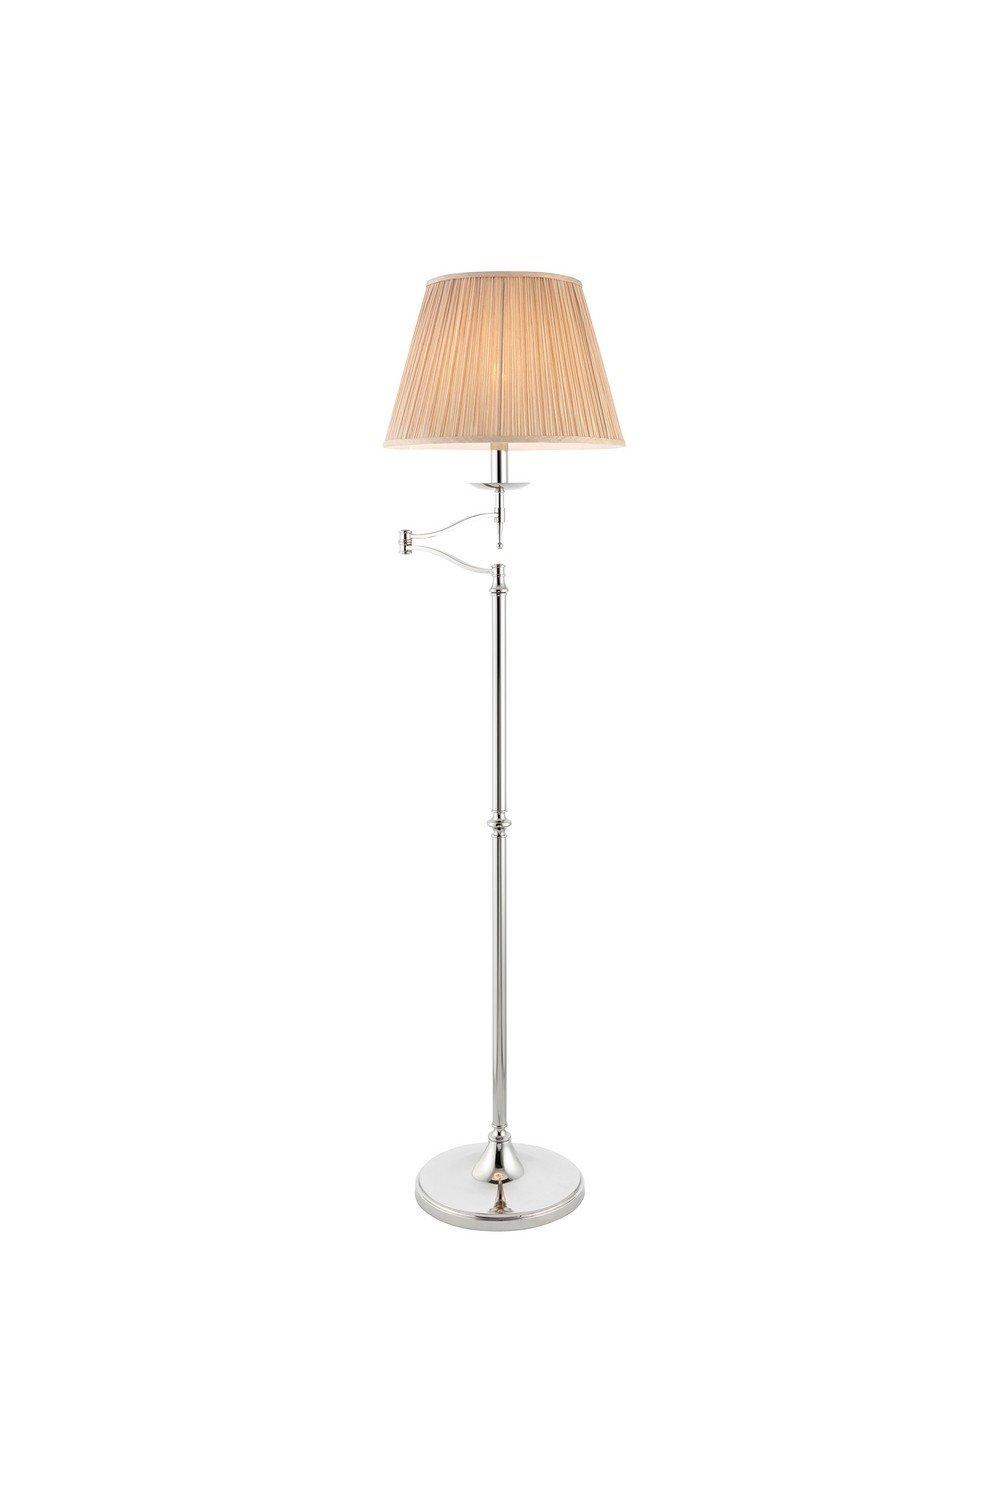 Stanford 1 Light Swing Arm Floor Lamp Polished Nickel Plate with Beige Shade E27